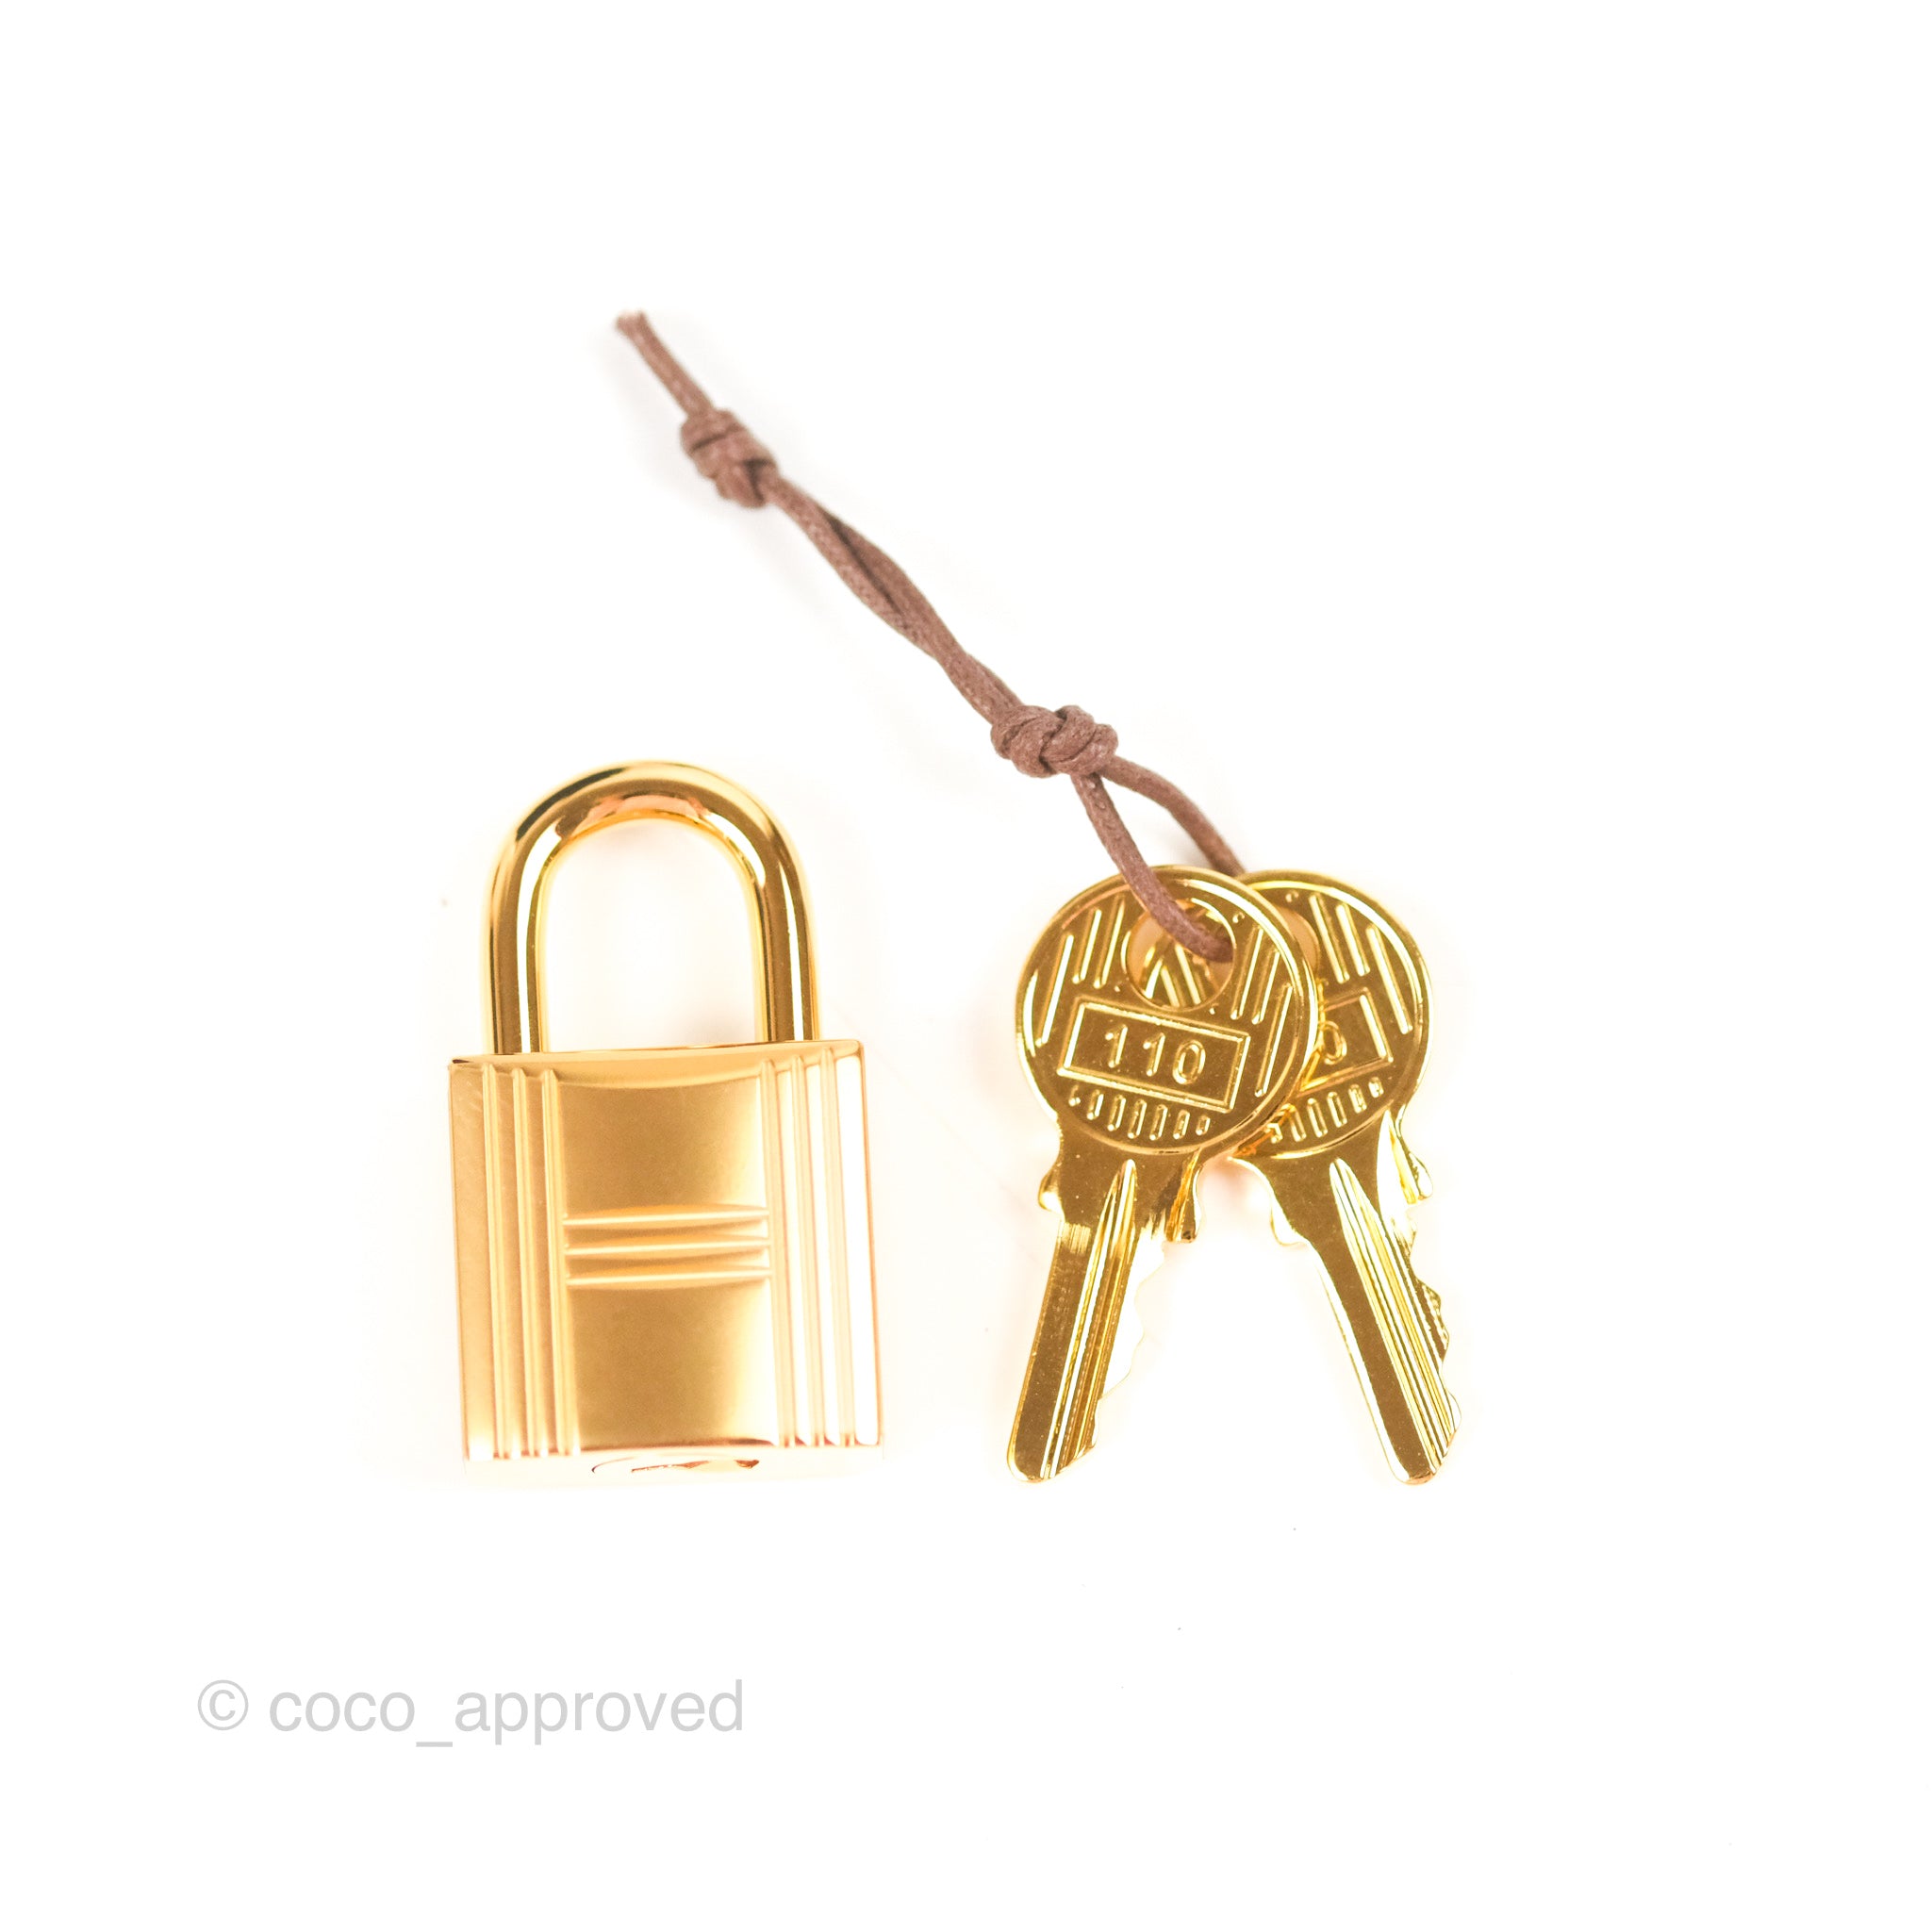 Hermes lock and key gold hardware